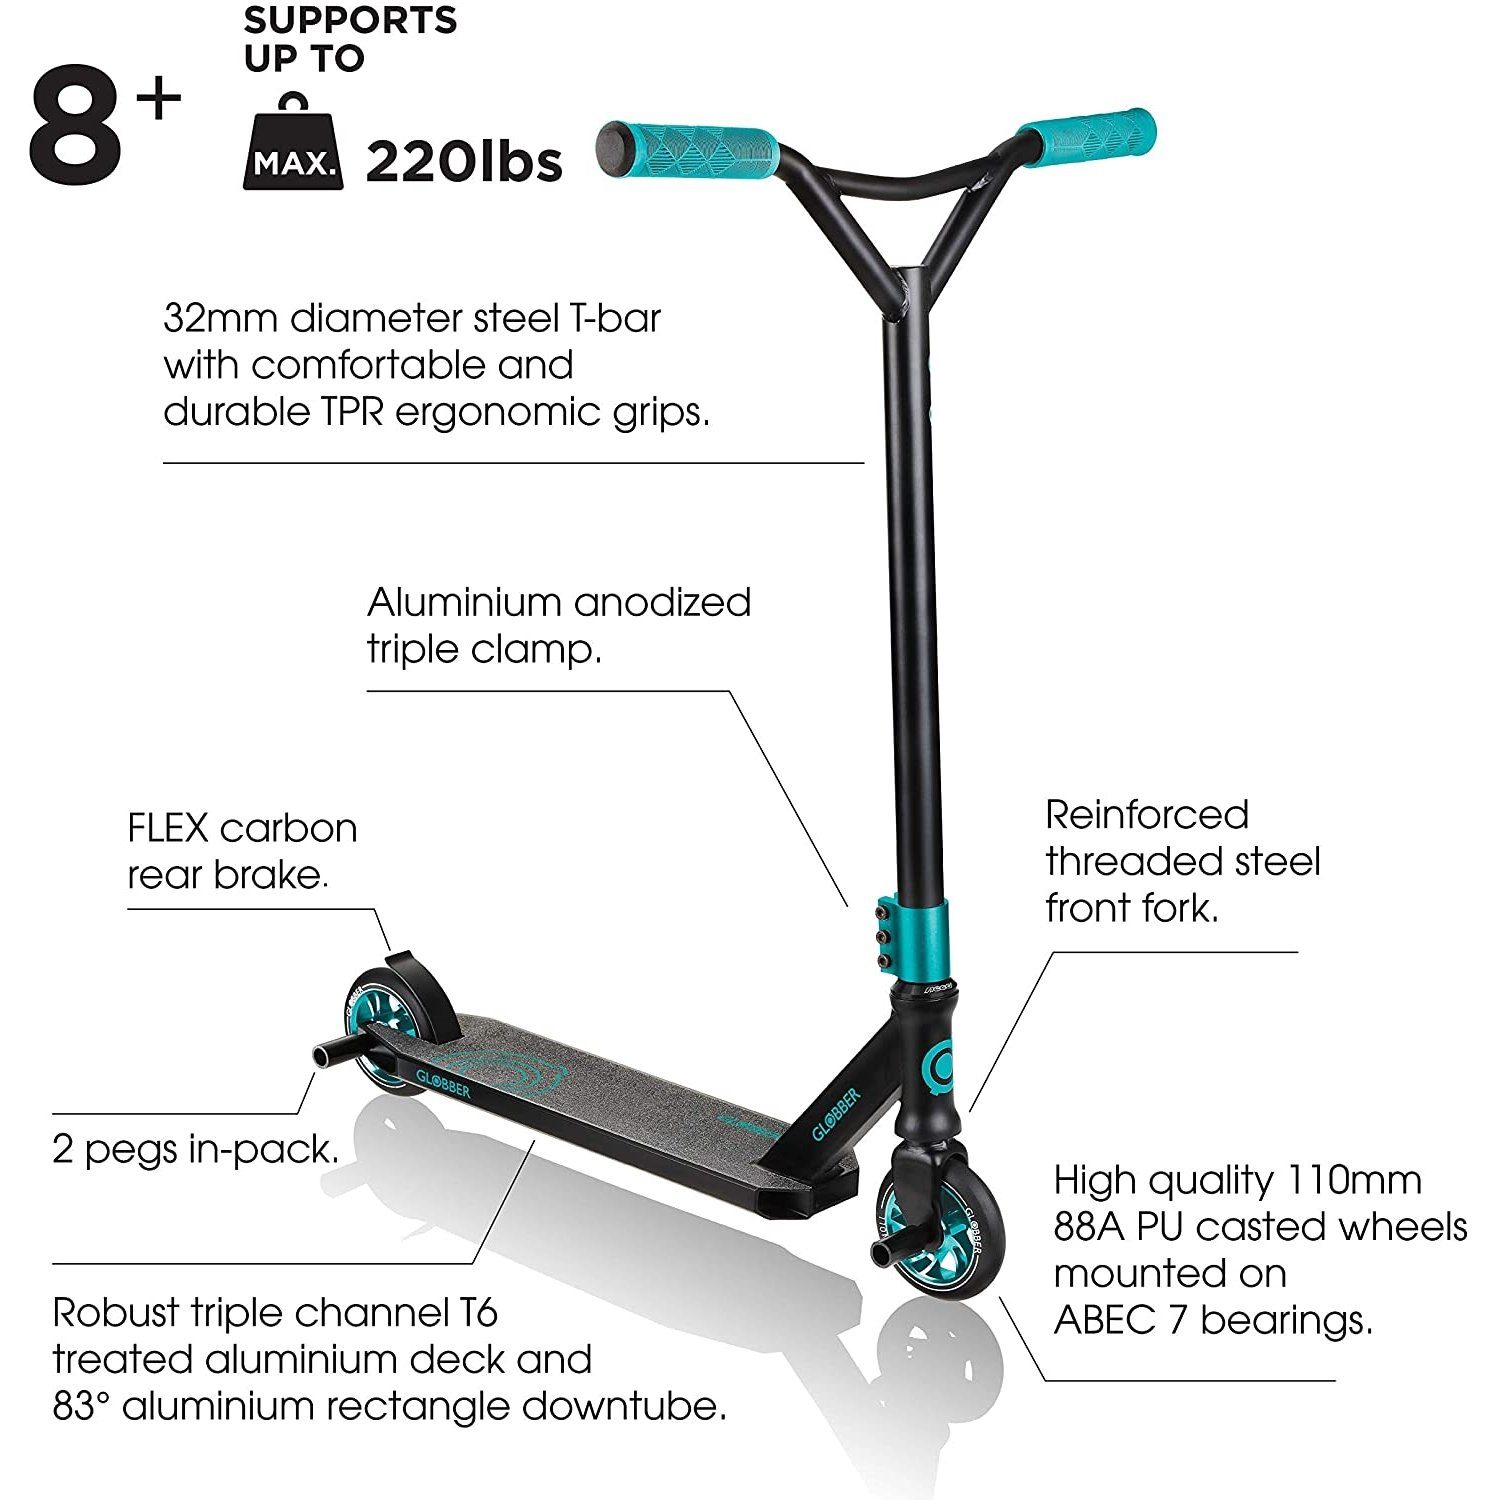 authentic sports & Globber 624-009-2 720 Türkis schwarz-teal Stuntscooter Scooter GS toys